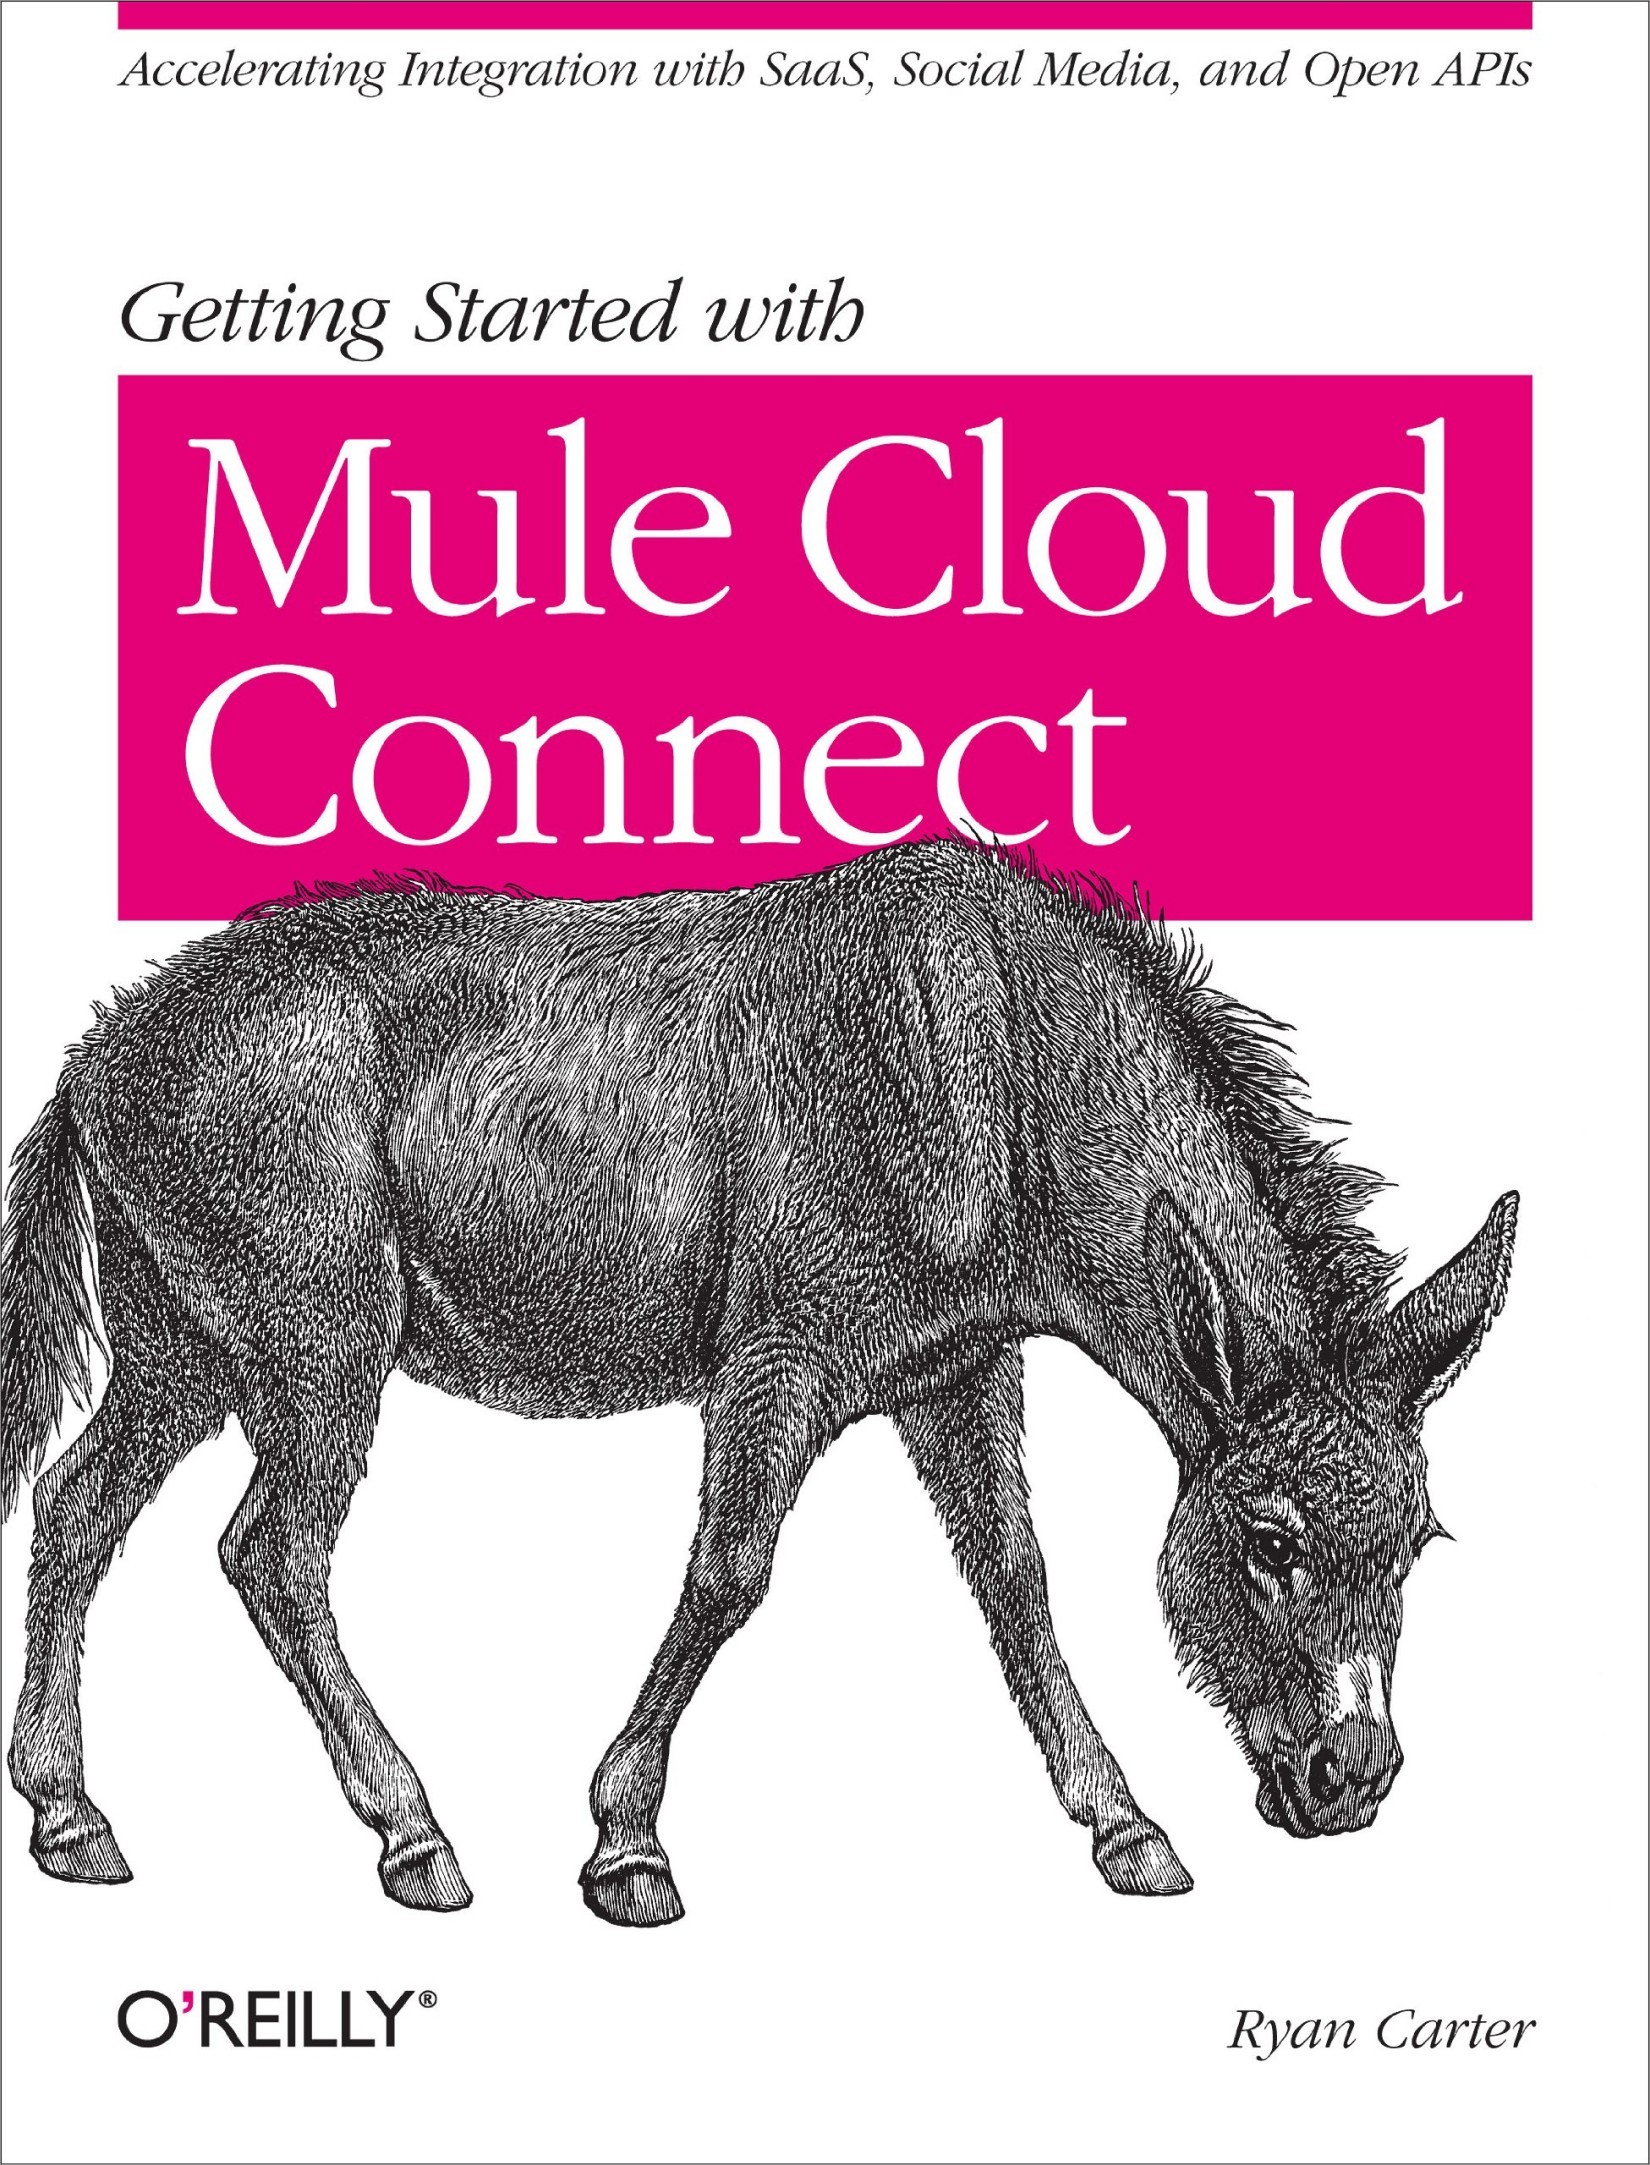 Getting Started With Mule Cloud Connect: Accelerating Integration With SaaS, Social Media and Open APIs